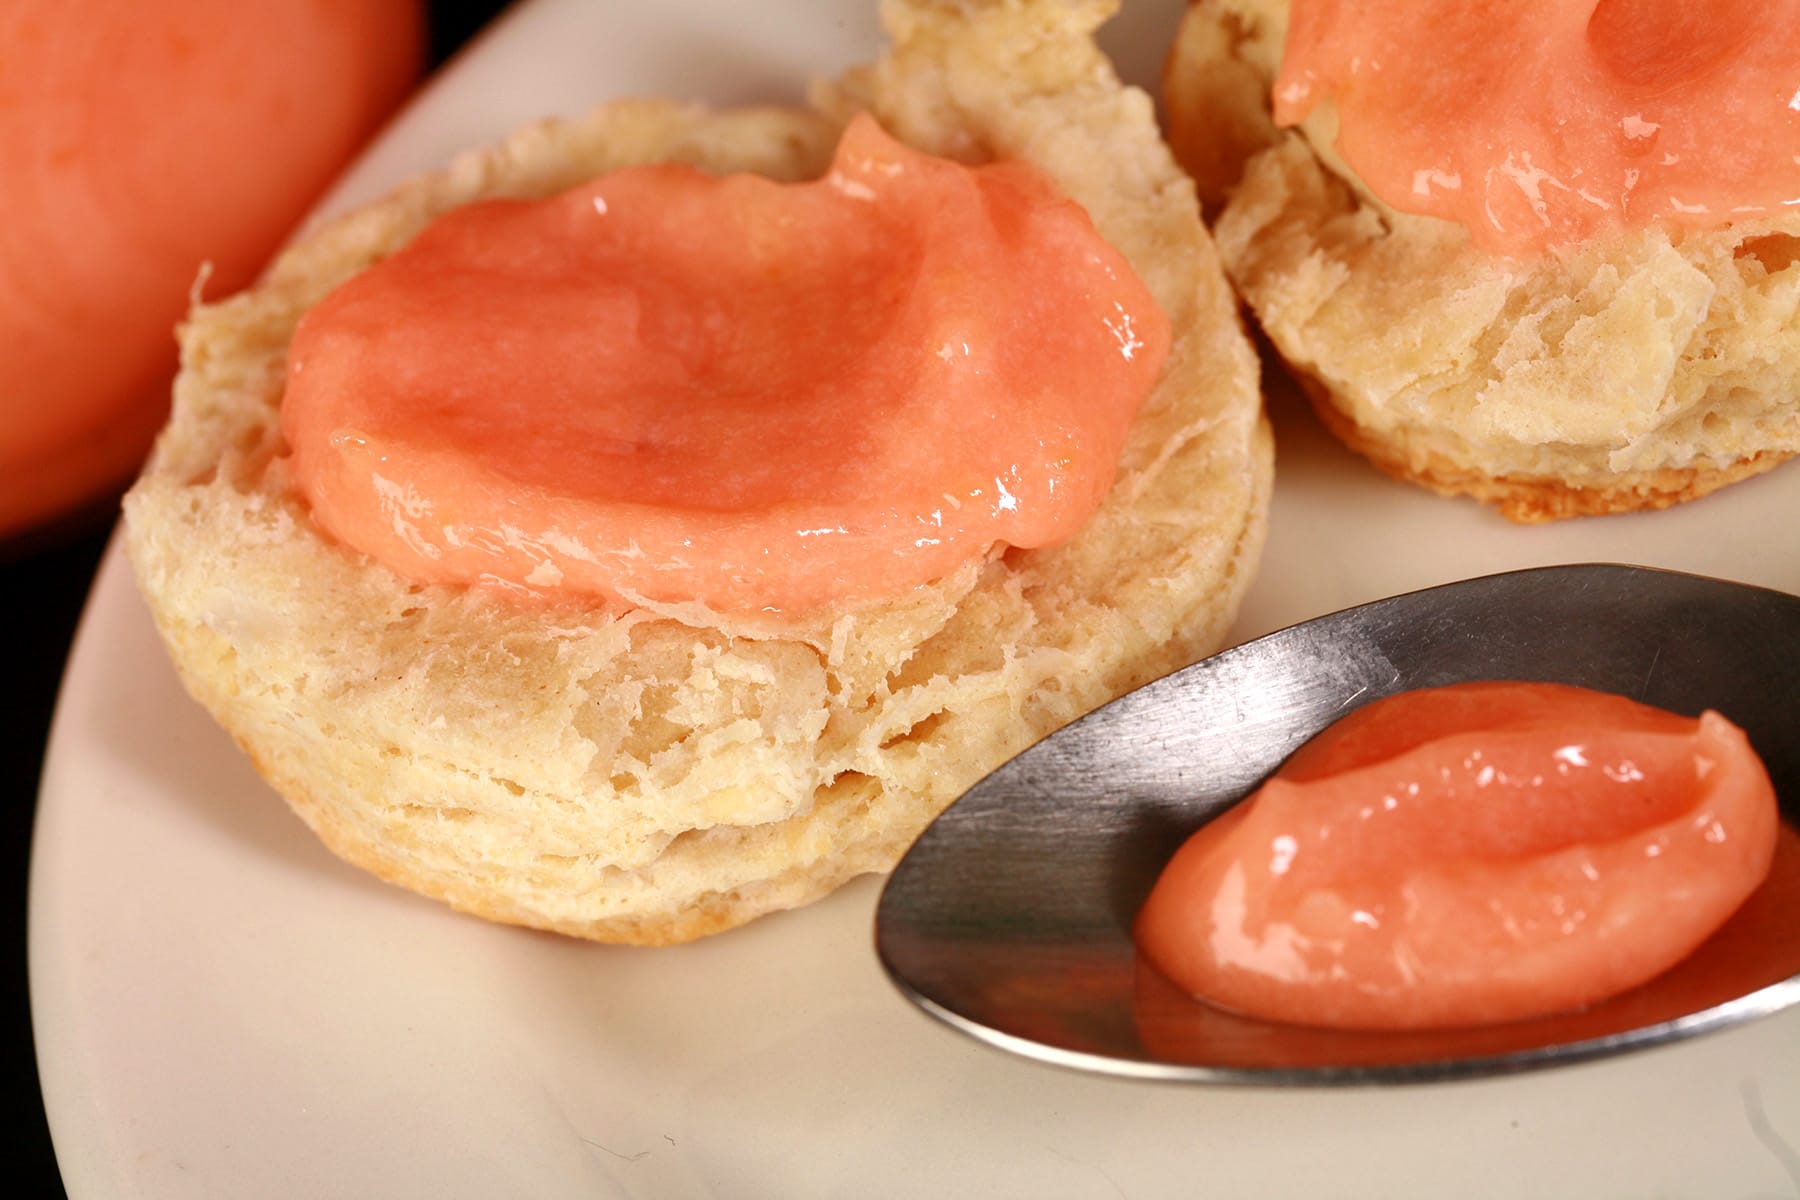 Two biscuits topped with pink grapefruit curd on a plate. There is a spoon of curd on the plate, and a jar of curd next to the plate.